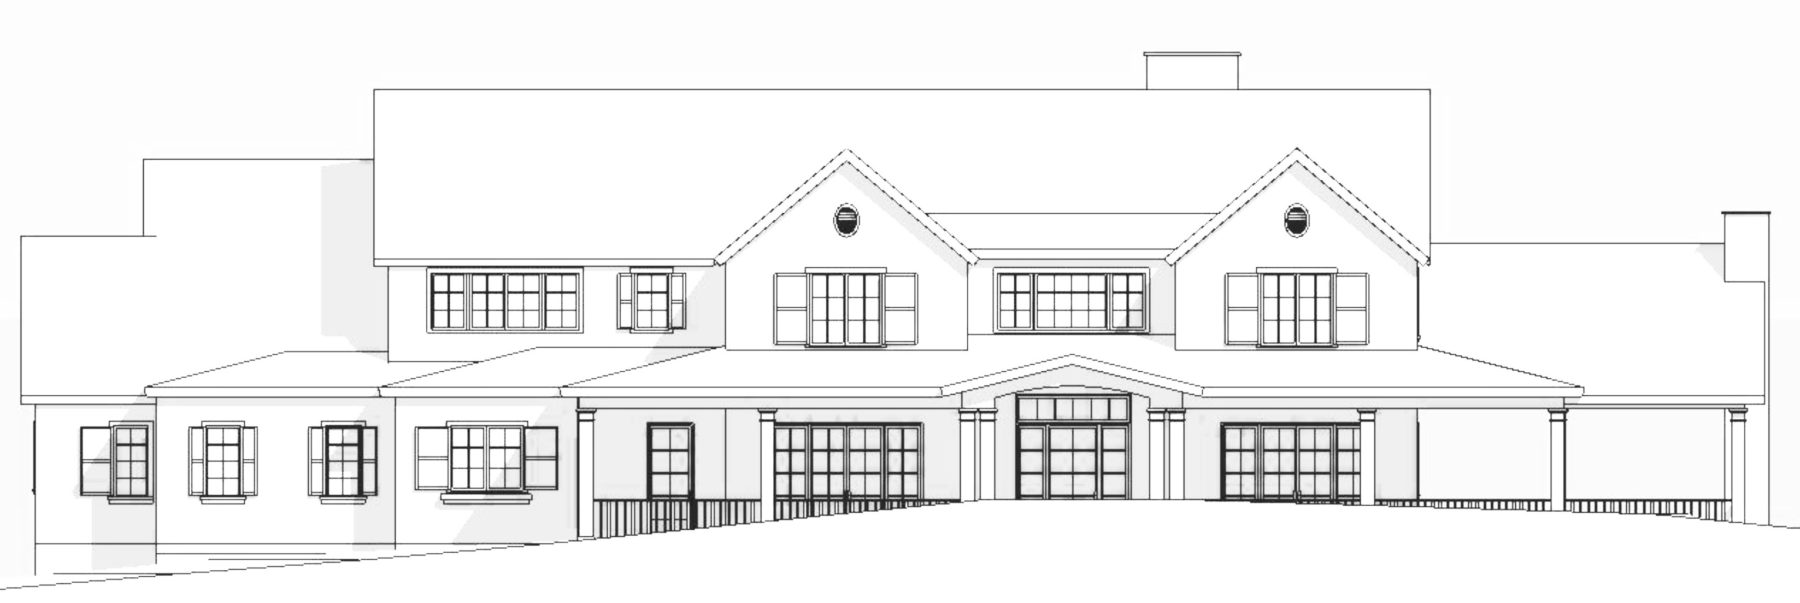 elevation of chapel hill home